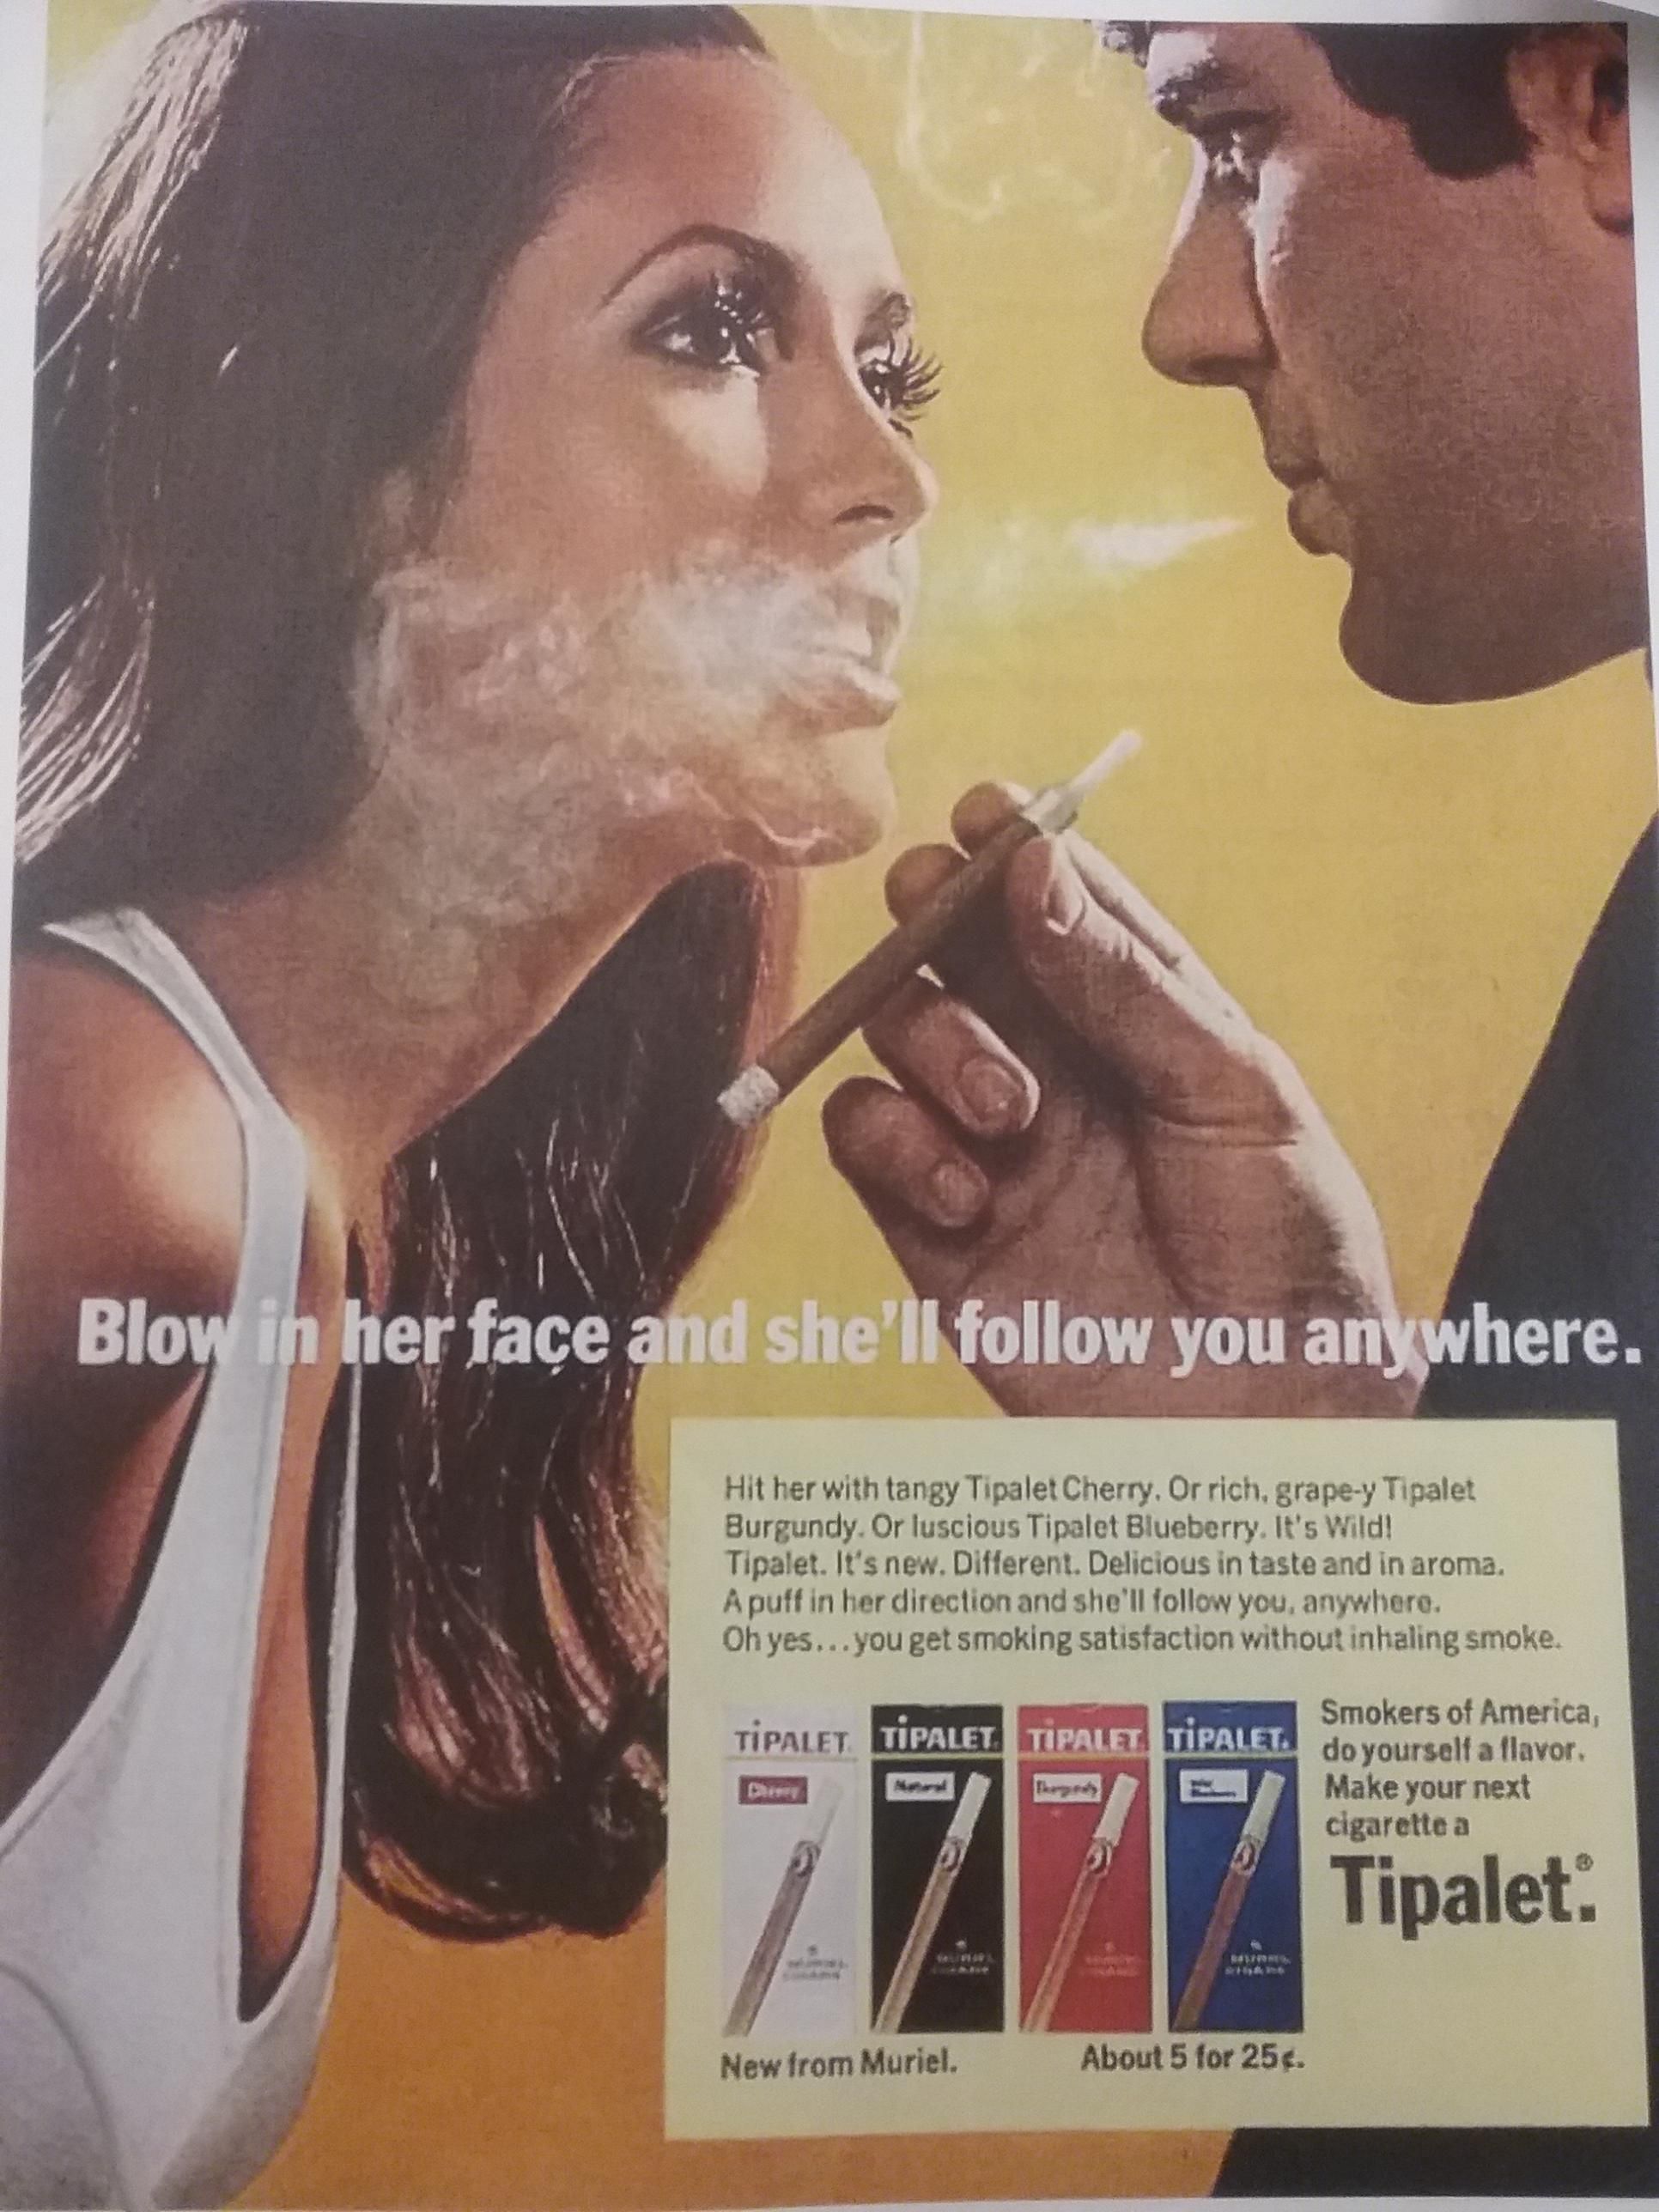 We were looking at smoking ads today in class and this little gem popped up.